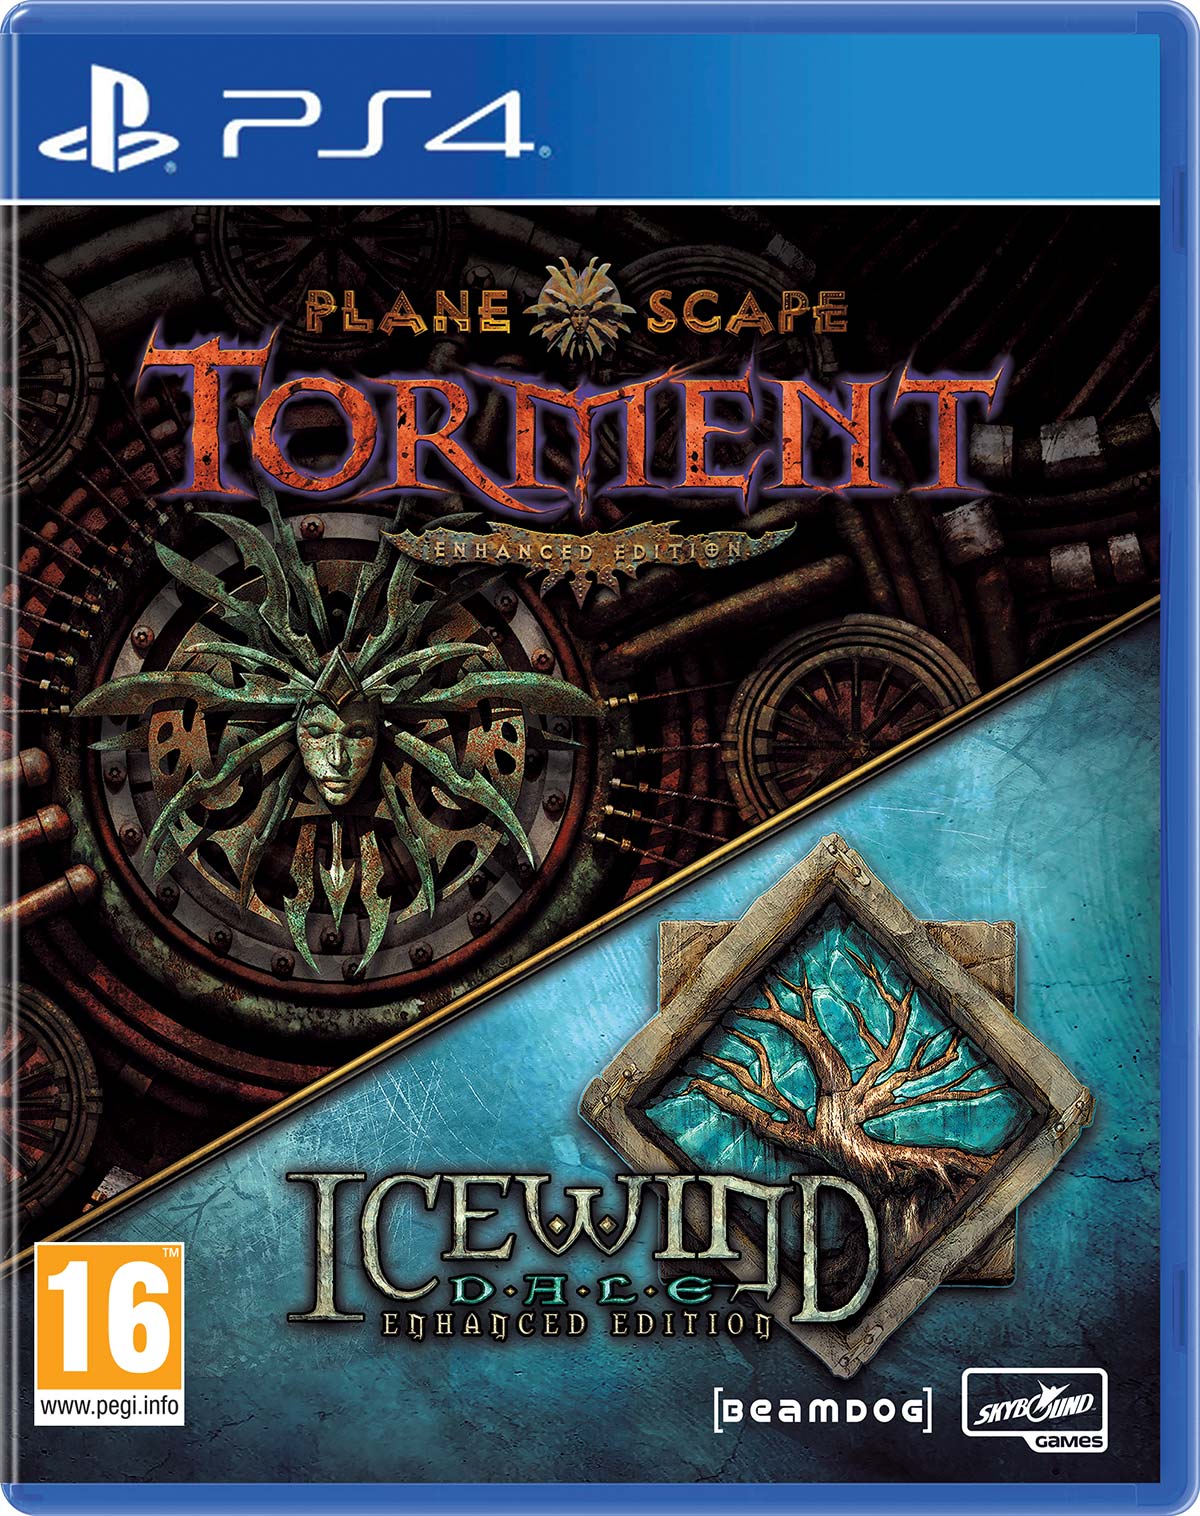 Planescape: Torment + Icewind Dale